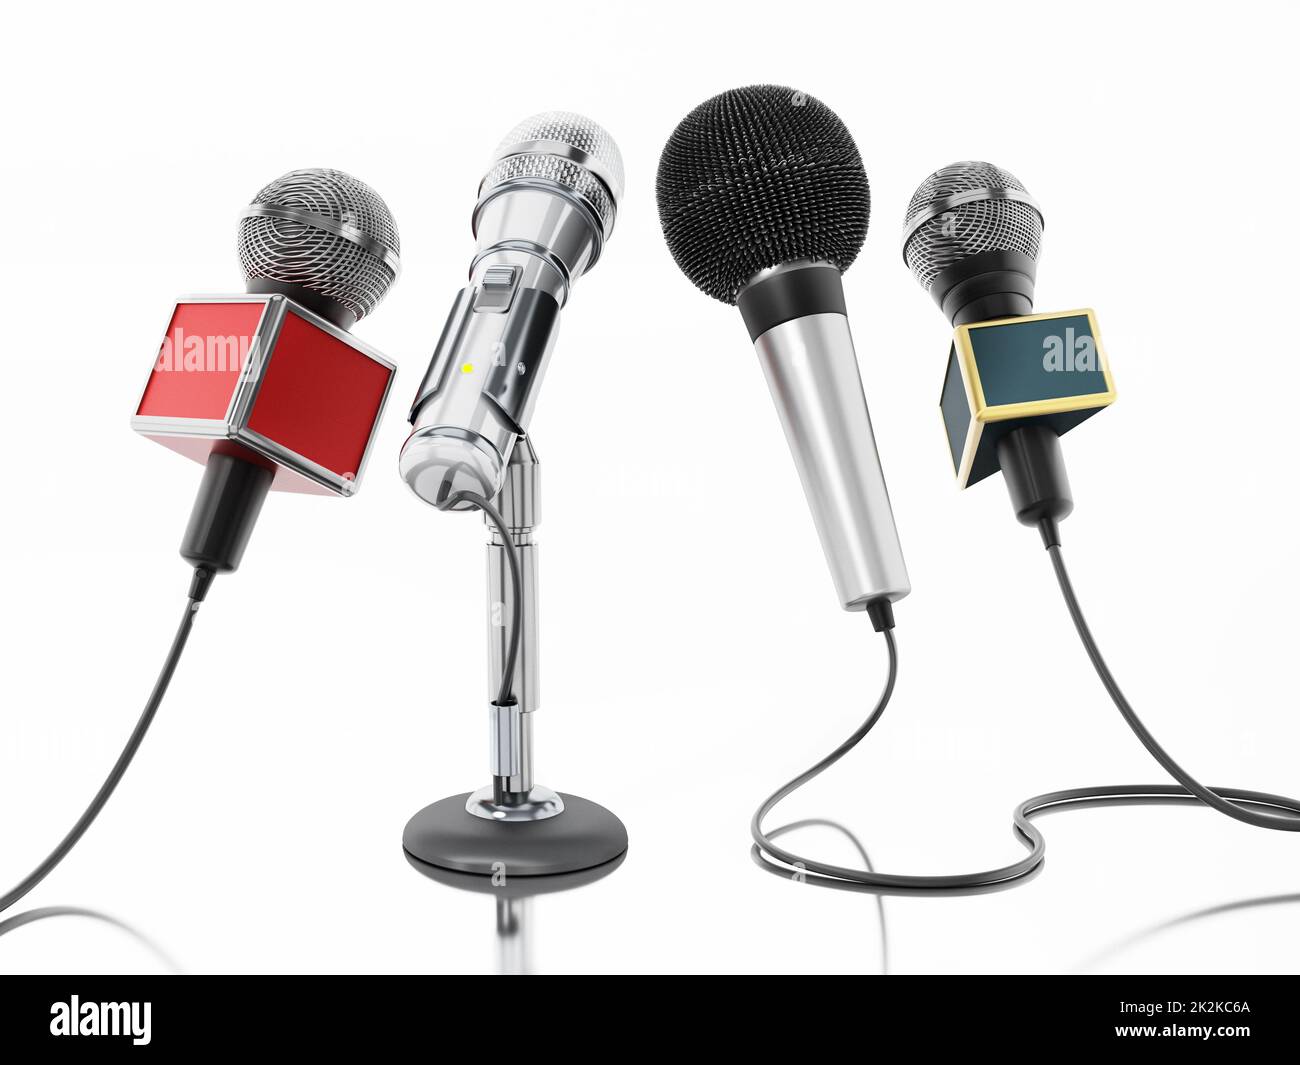 Aligned news microphones isolated on white background. 3D illustration Stock Photo